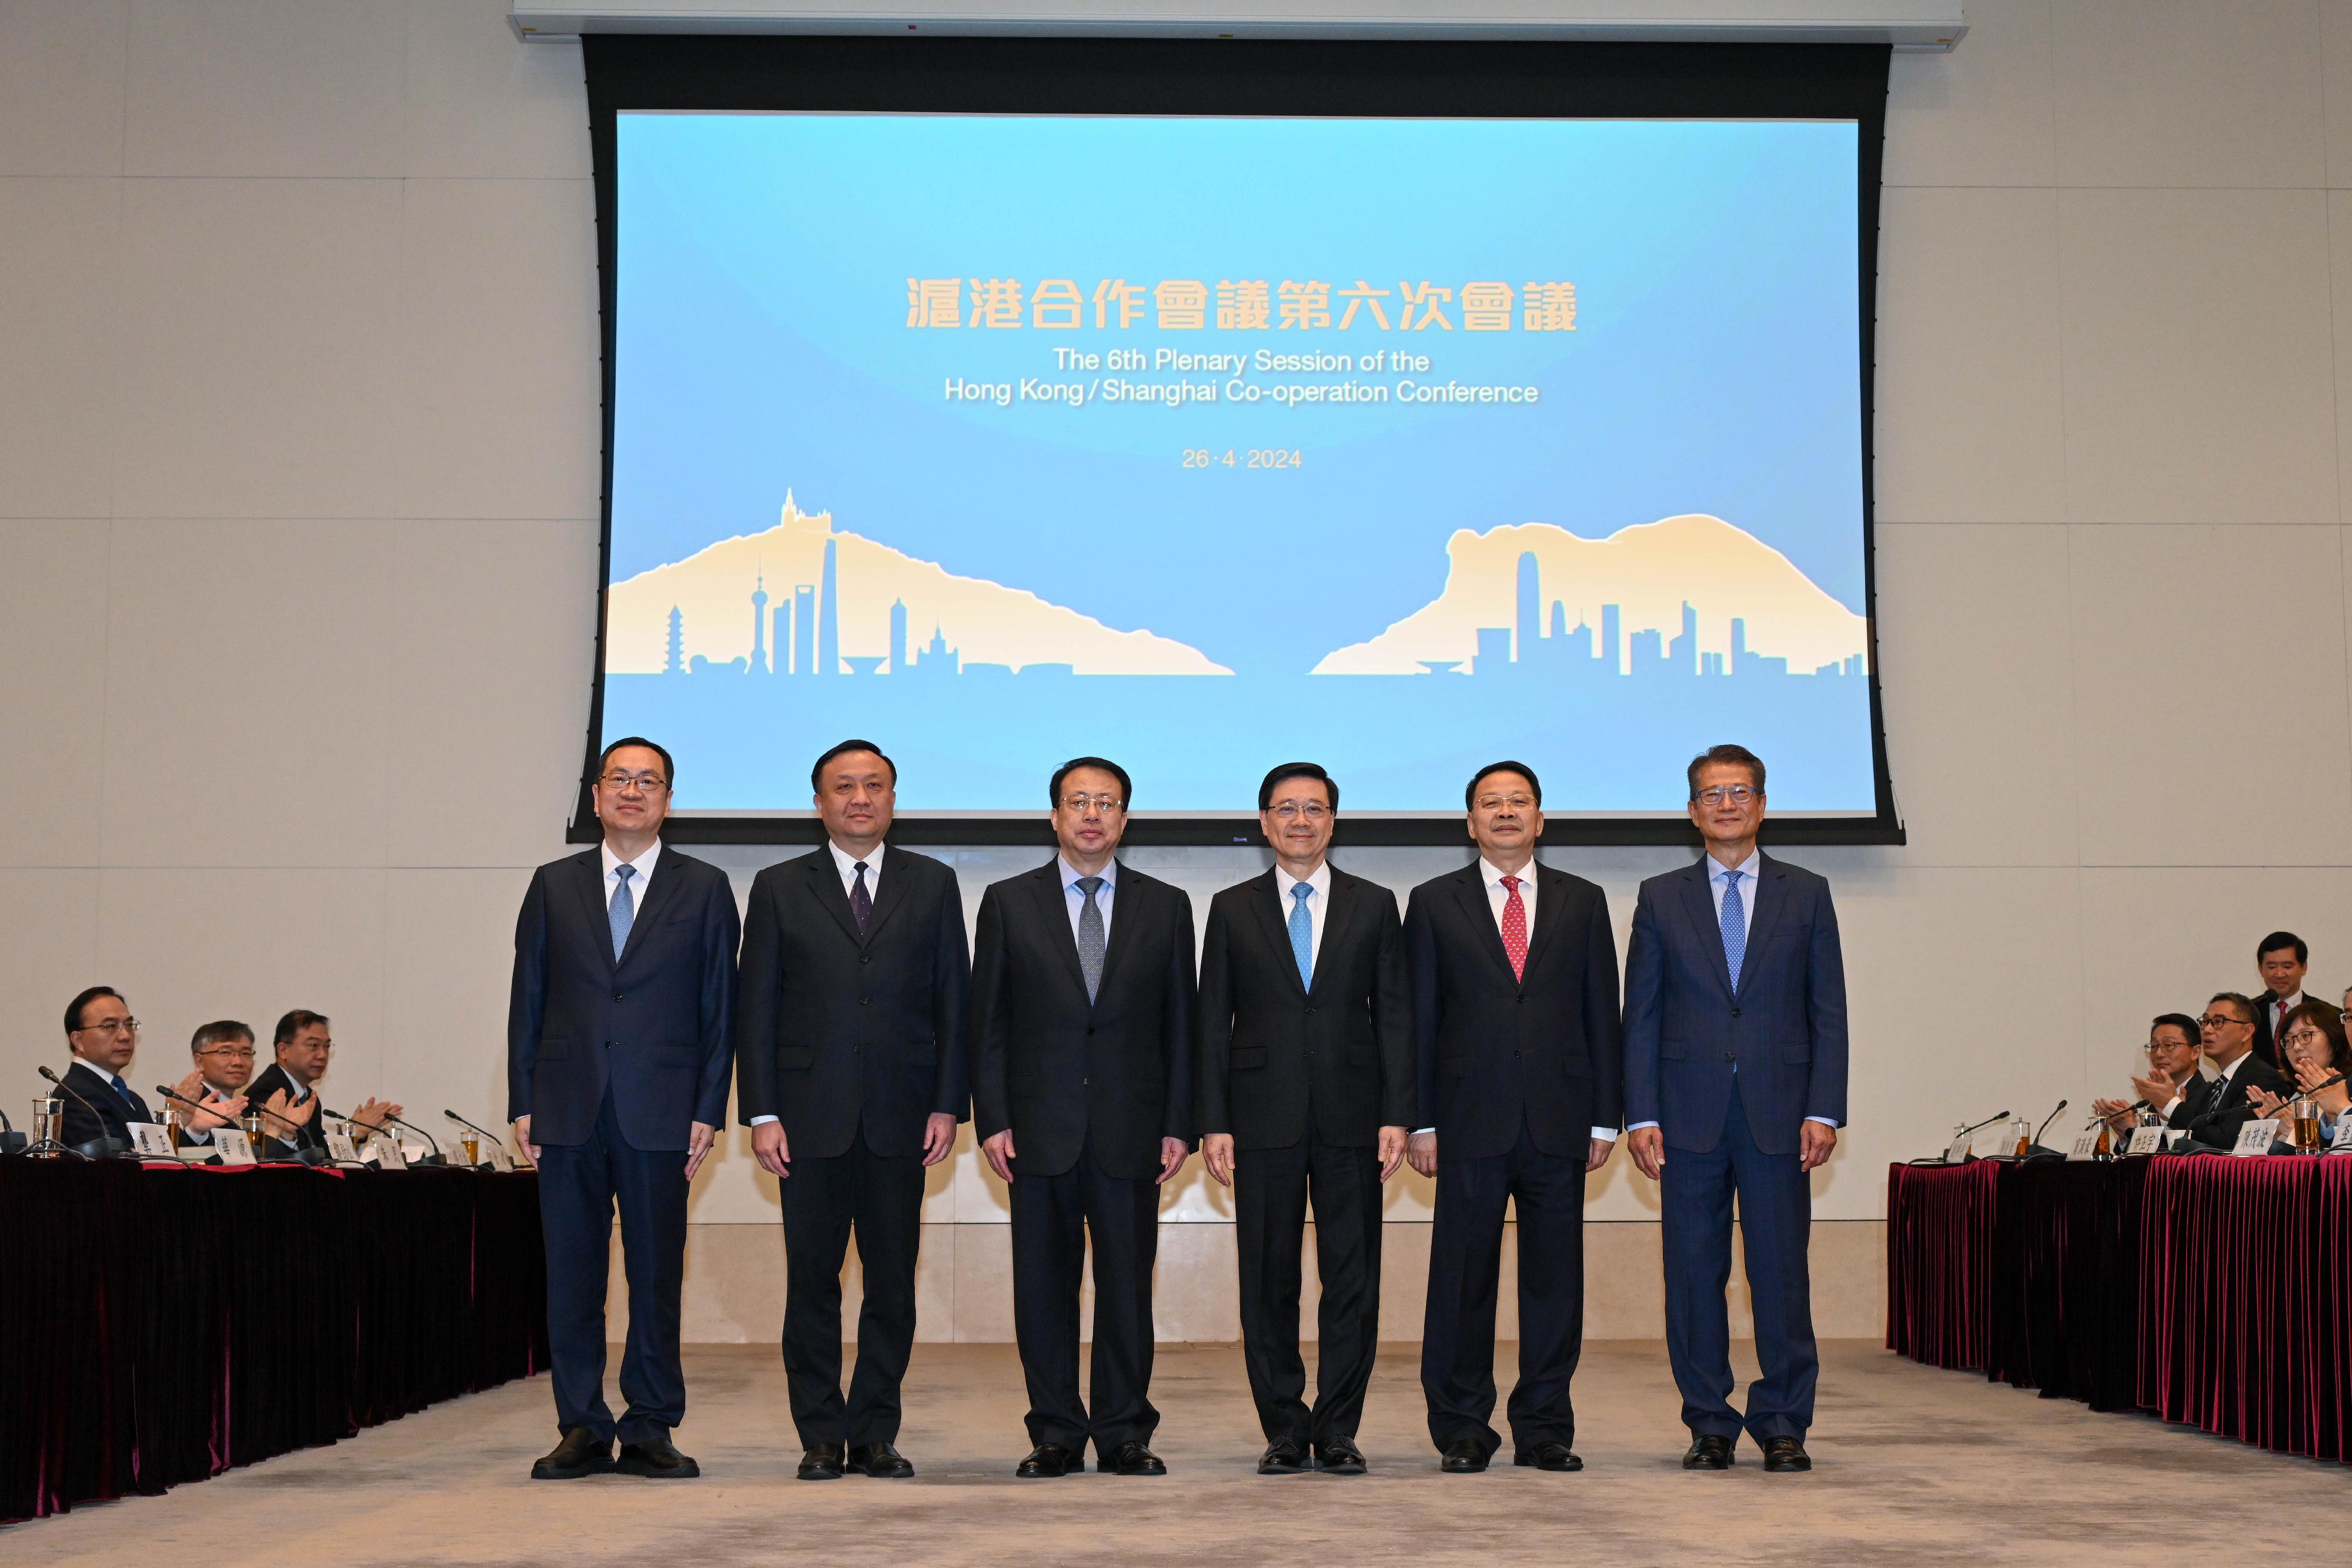 The Chief Executive, Mr John Lee, led a Hong Kong Special Administrative Region (HKSAR) Government delegation to attend the 6th Plenary Session of the Hong Kong/Shanghai Co-operation Conference in the Central Government Offices today (April 26). Photo shows (from left) the Director of Bureau III of the Hong Kong and Macao Work Office of the Communist Party of China Central Committee and the Hong Kong and Macao Affairs Office of the State Council, Mr Zou Jinsong; Vice Mayor of the Shanghai Municipal Government Mr Hua Yuan; the Mayor of Shanghai, Mr Gong Zheng; Mr Lee; Deputy Director of the Liaison Office of the Central People's Government in the HKSAR Mr Yin Zonghua; and the Financial Secretary, Mr Paul Chan, before the Plenary.
